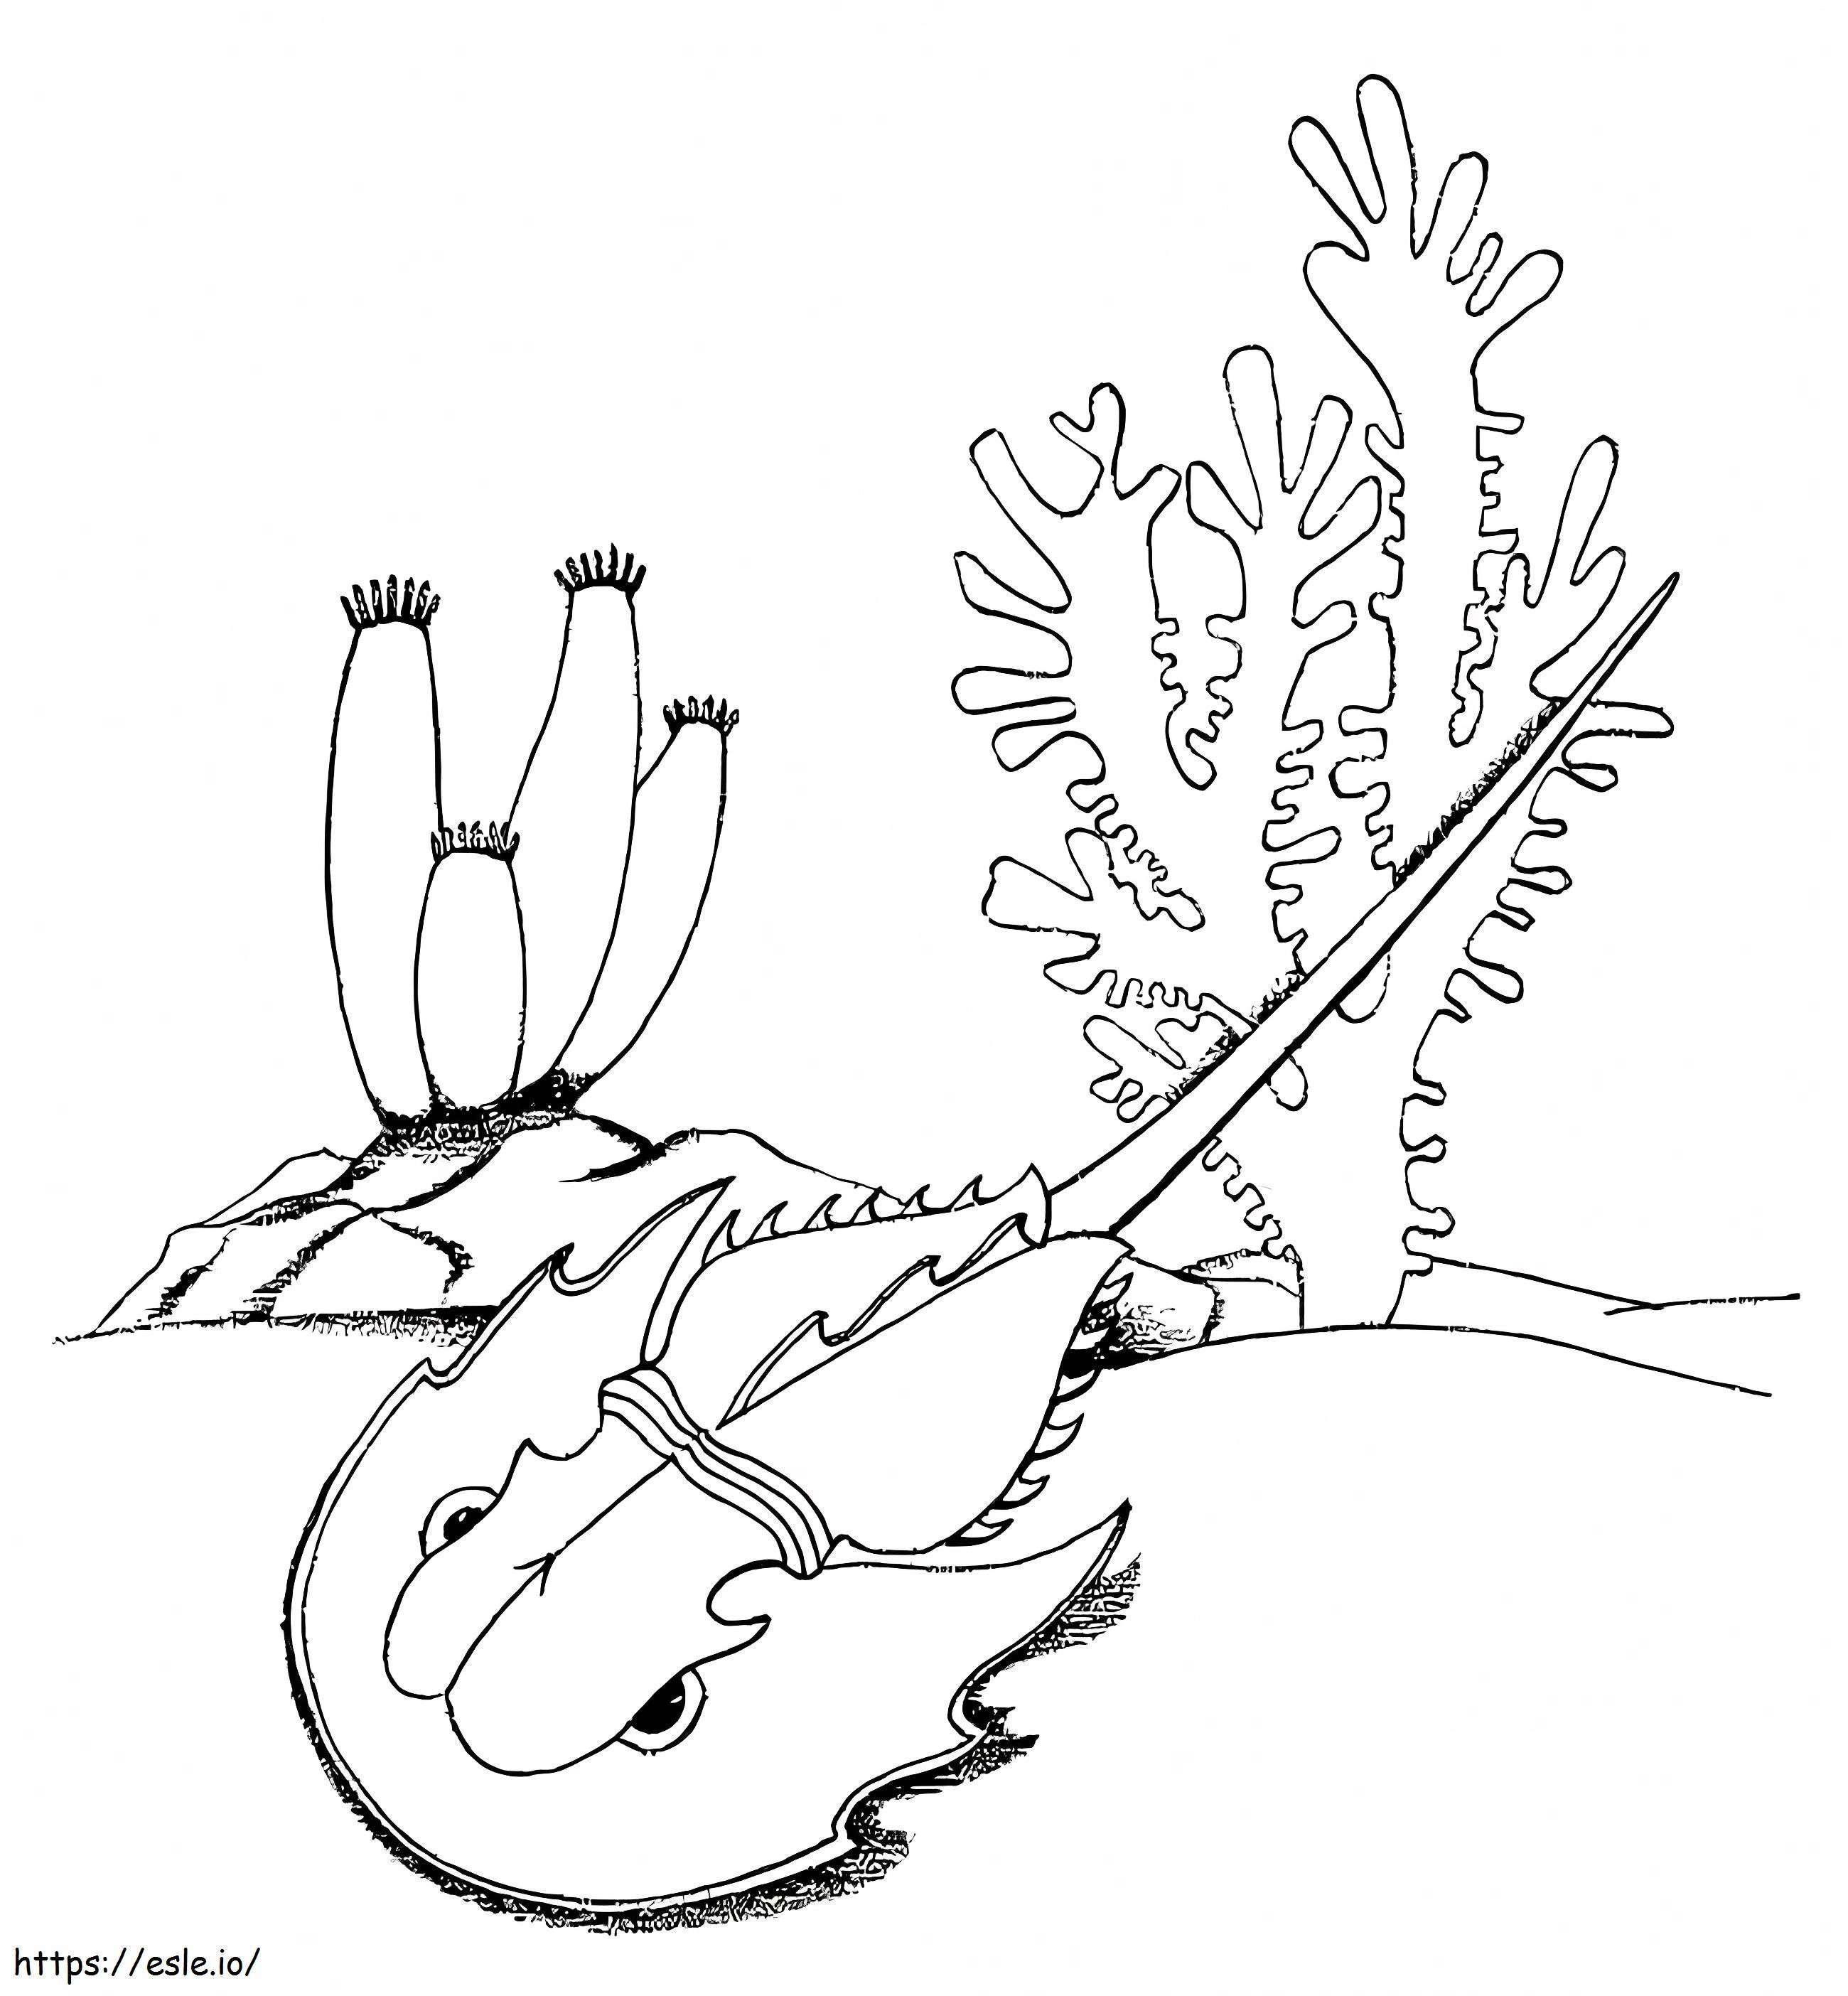 Horseshoe Crab In The Sea coloring page